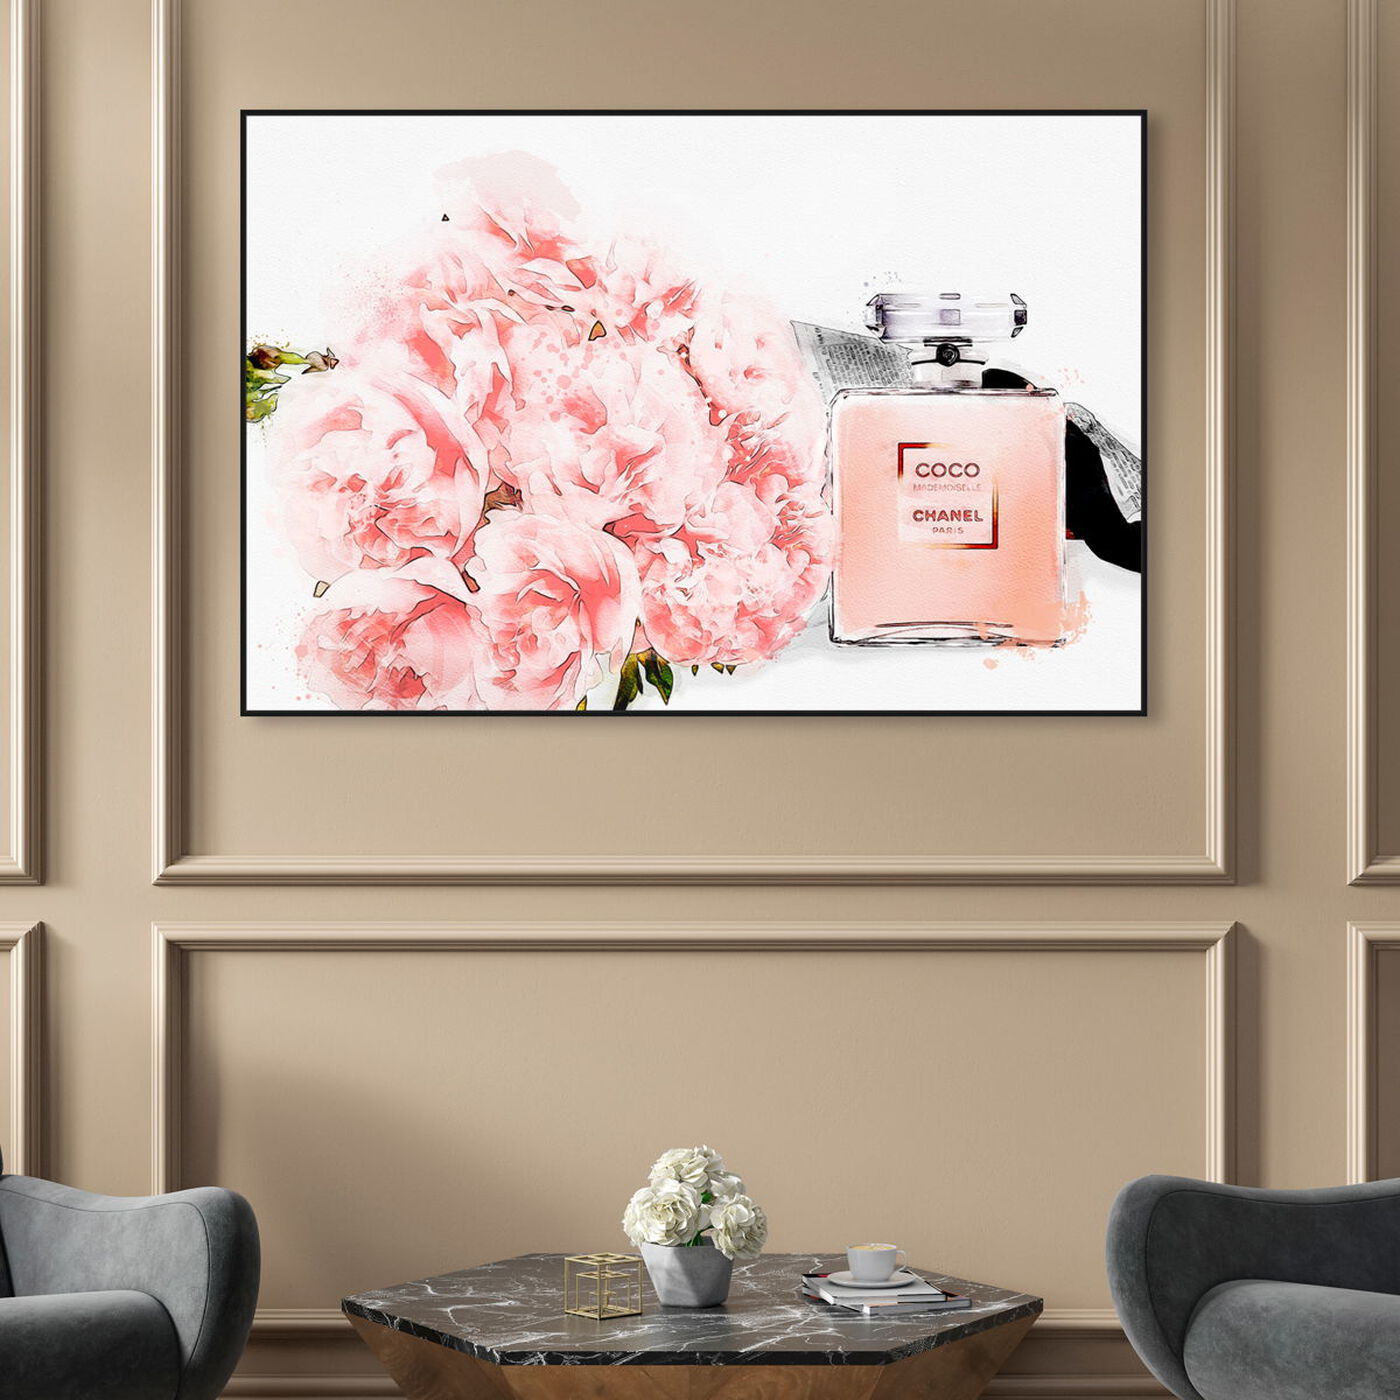 ART PRINT Pink No 5 Perfume Bottle Vase Peonies Roses Flowers Chanel  Watercolor Painting, Fashion Ill…